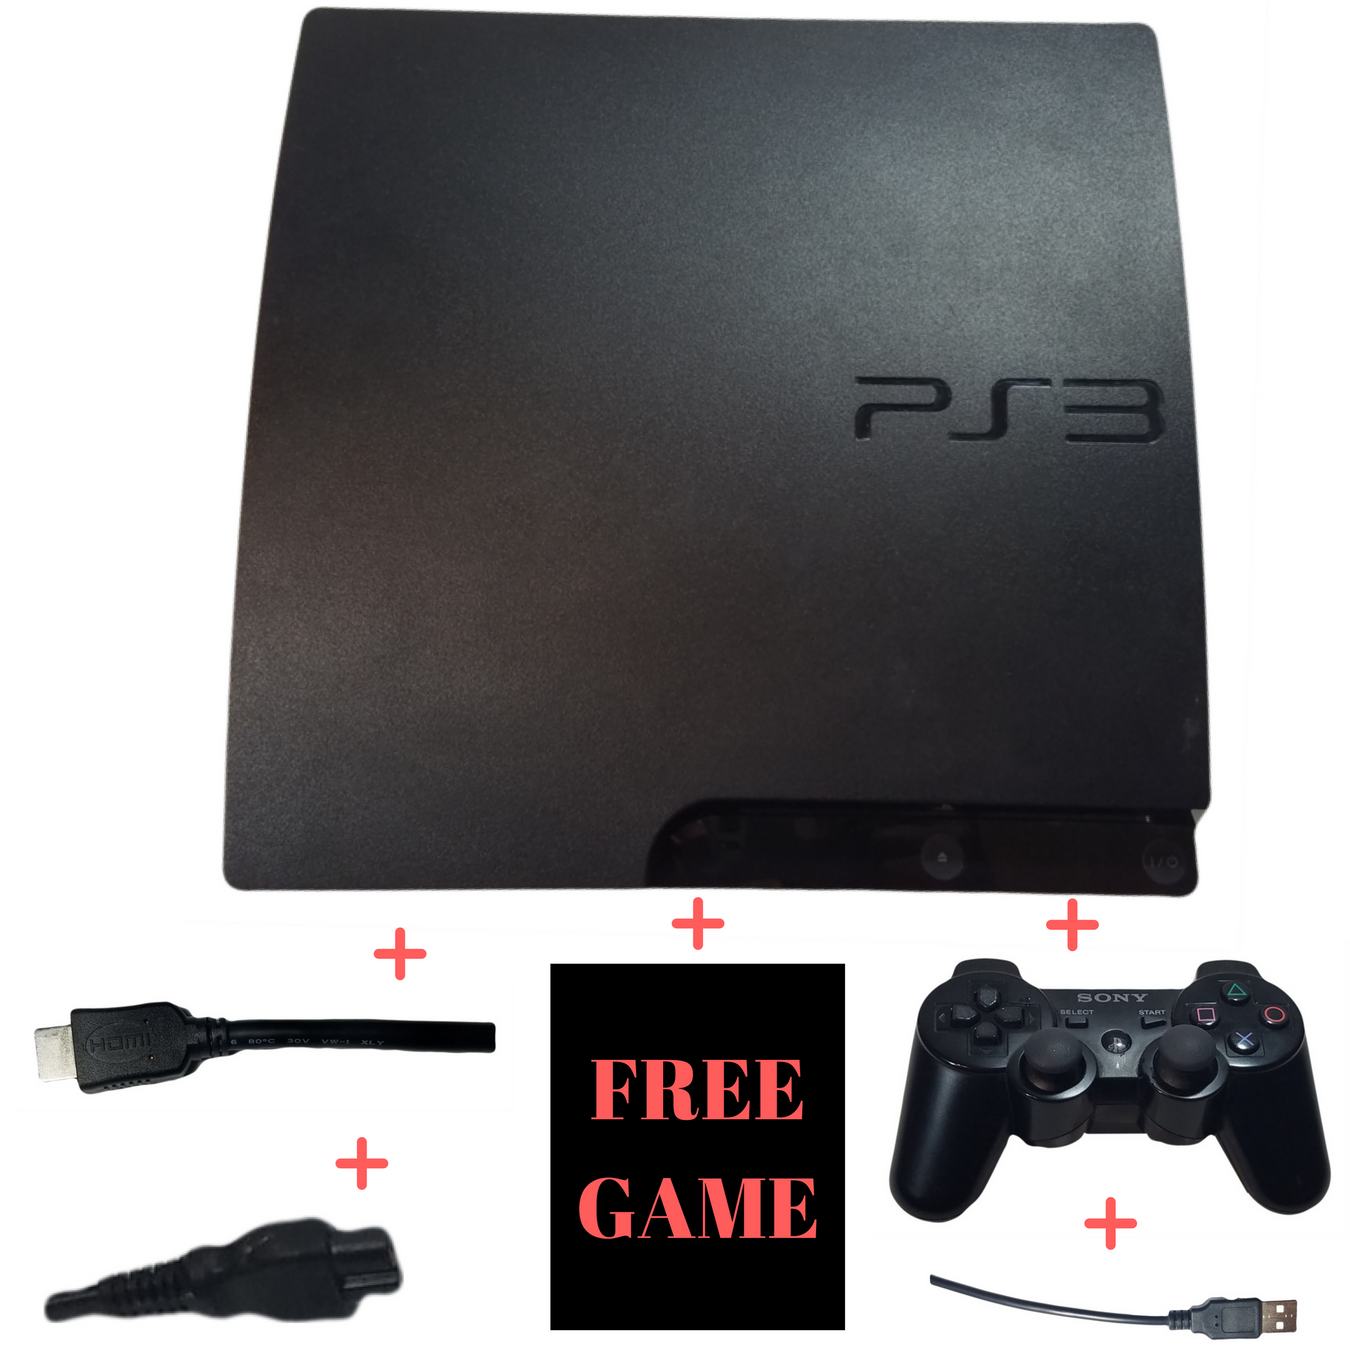 PlayStation 3 Consoles